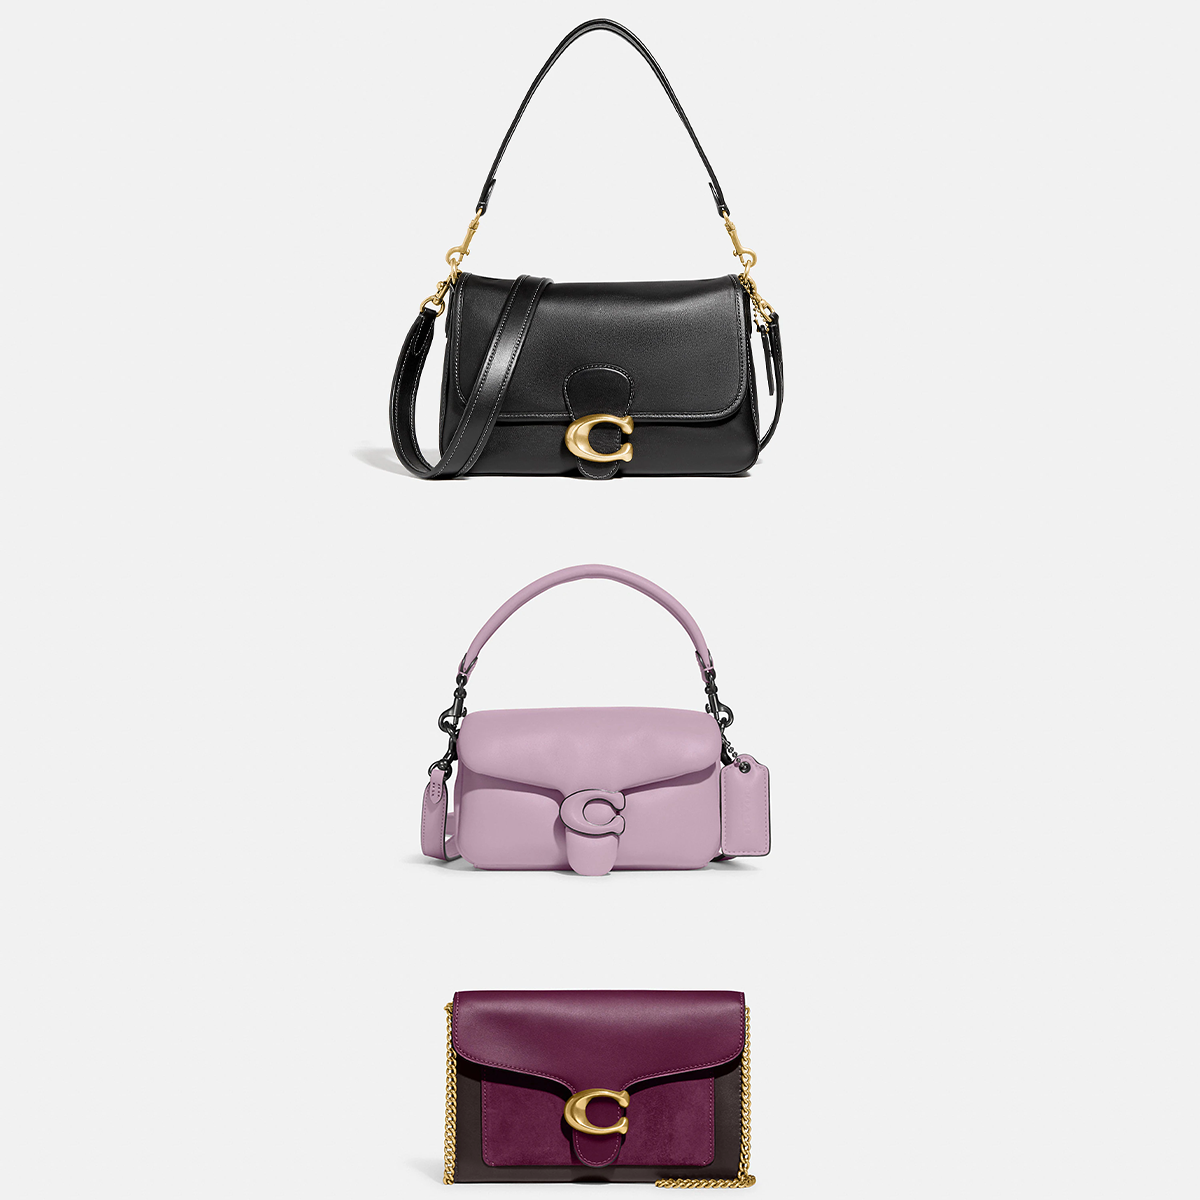 The Coach Black Friday Sale Is Already Here—And Bags Are 50% Off